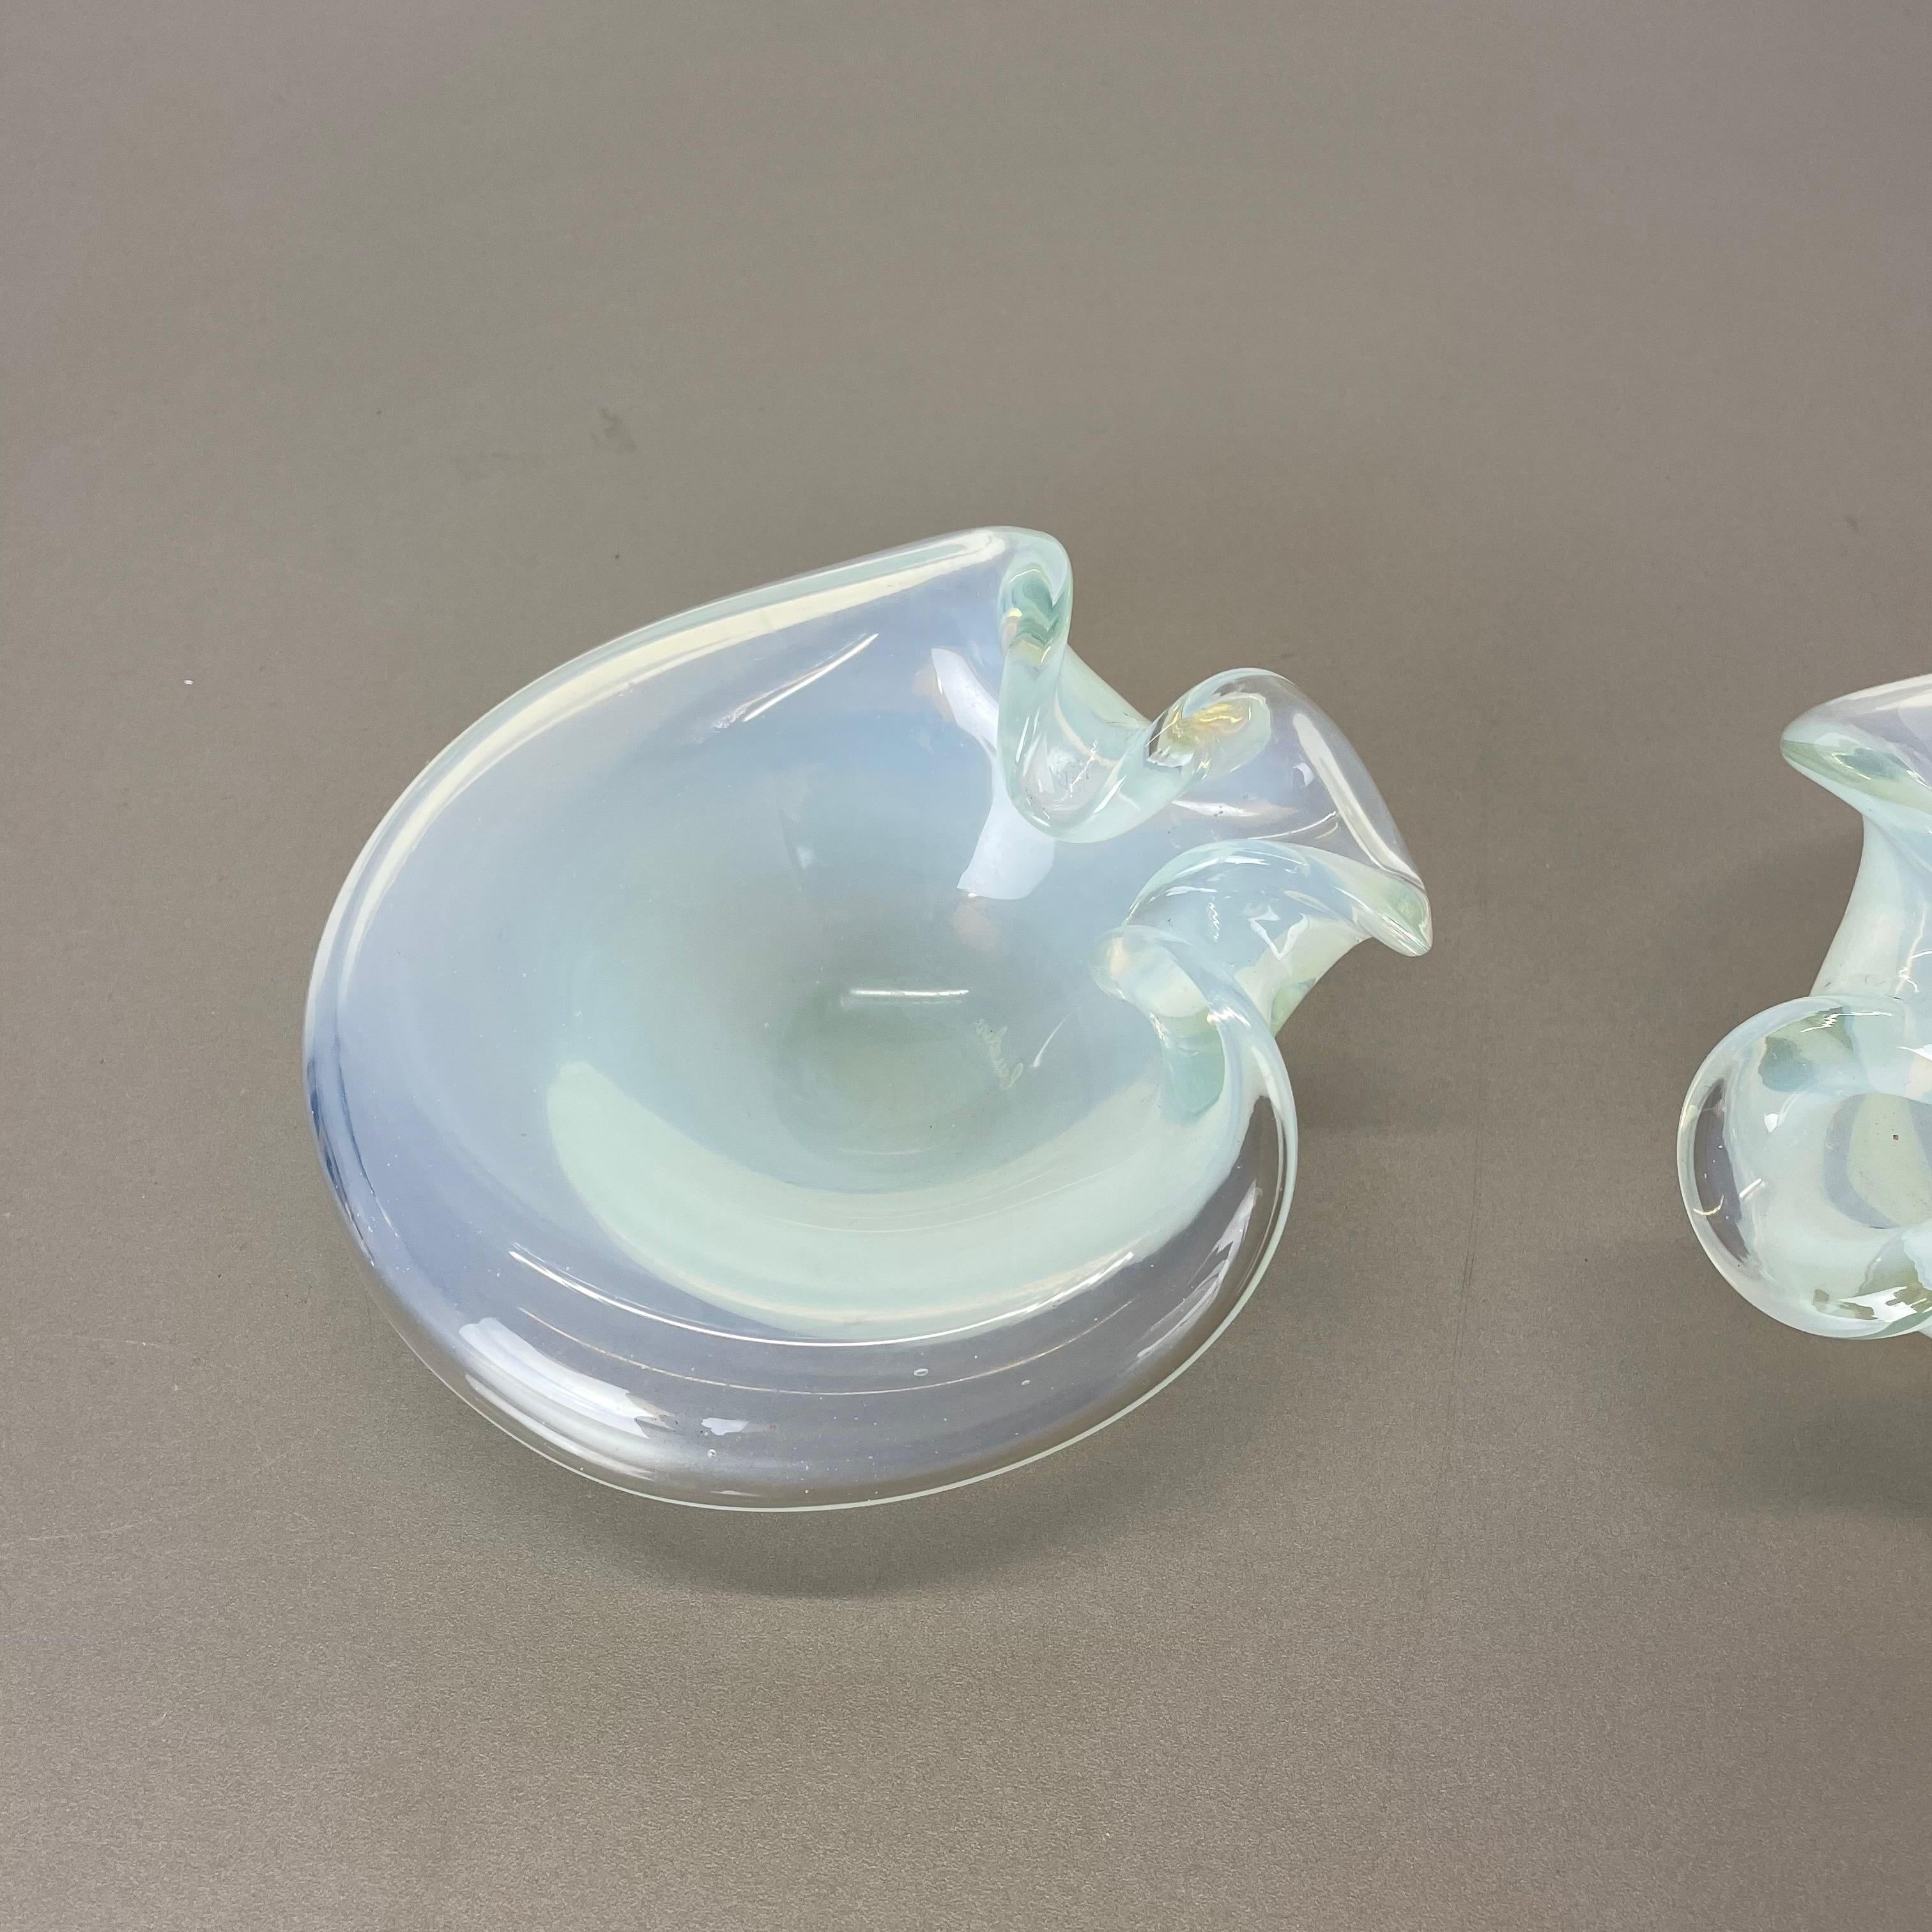 Set of 2 New Old Stock, Murano Glass Shell Bowl by Antonio da Ros Cenedese, 1960 For Sale 4